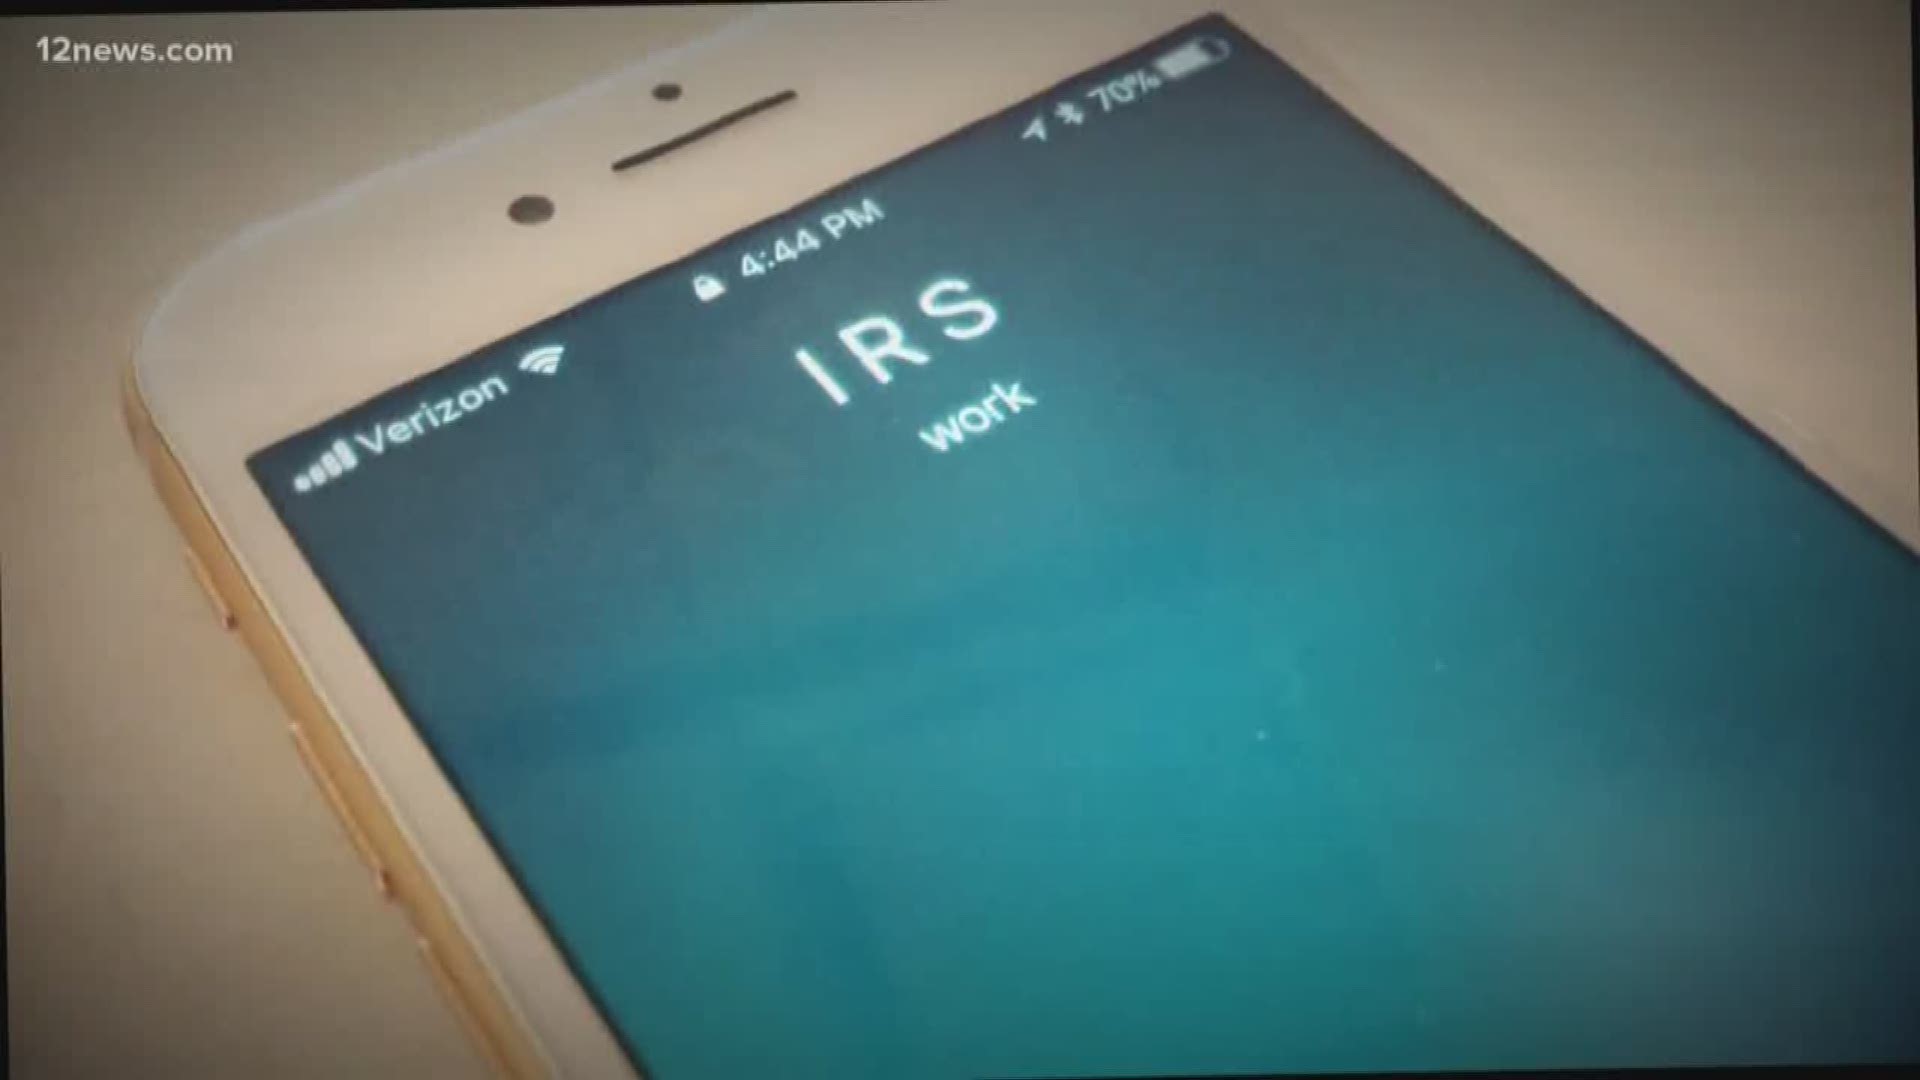 The scam originated from India but employed people working in the U.S. to make calls to unsuspecting people claiming to be the IRS. One of 12 News' own got a call from the scammers, so we called them back.